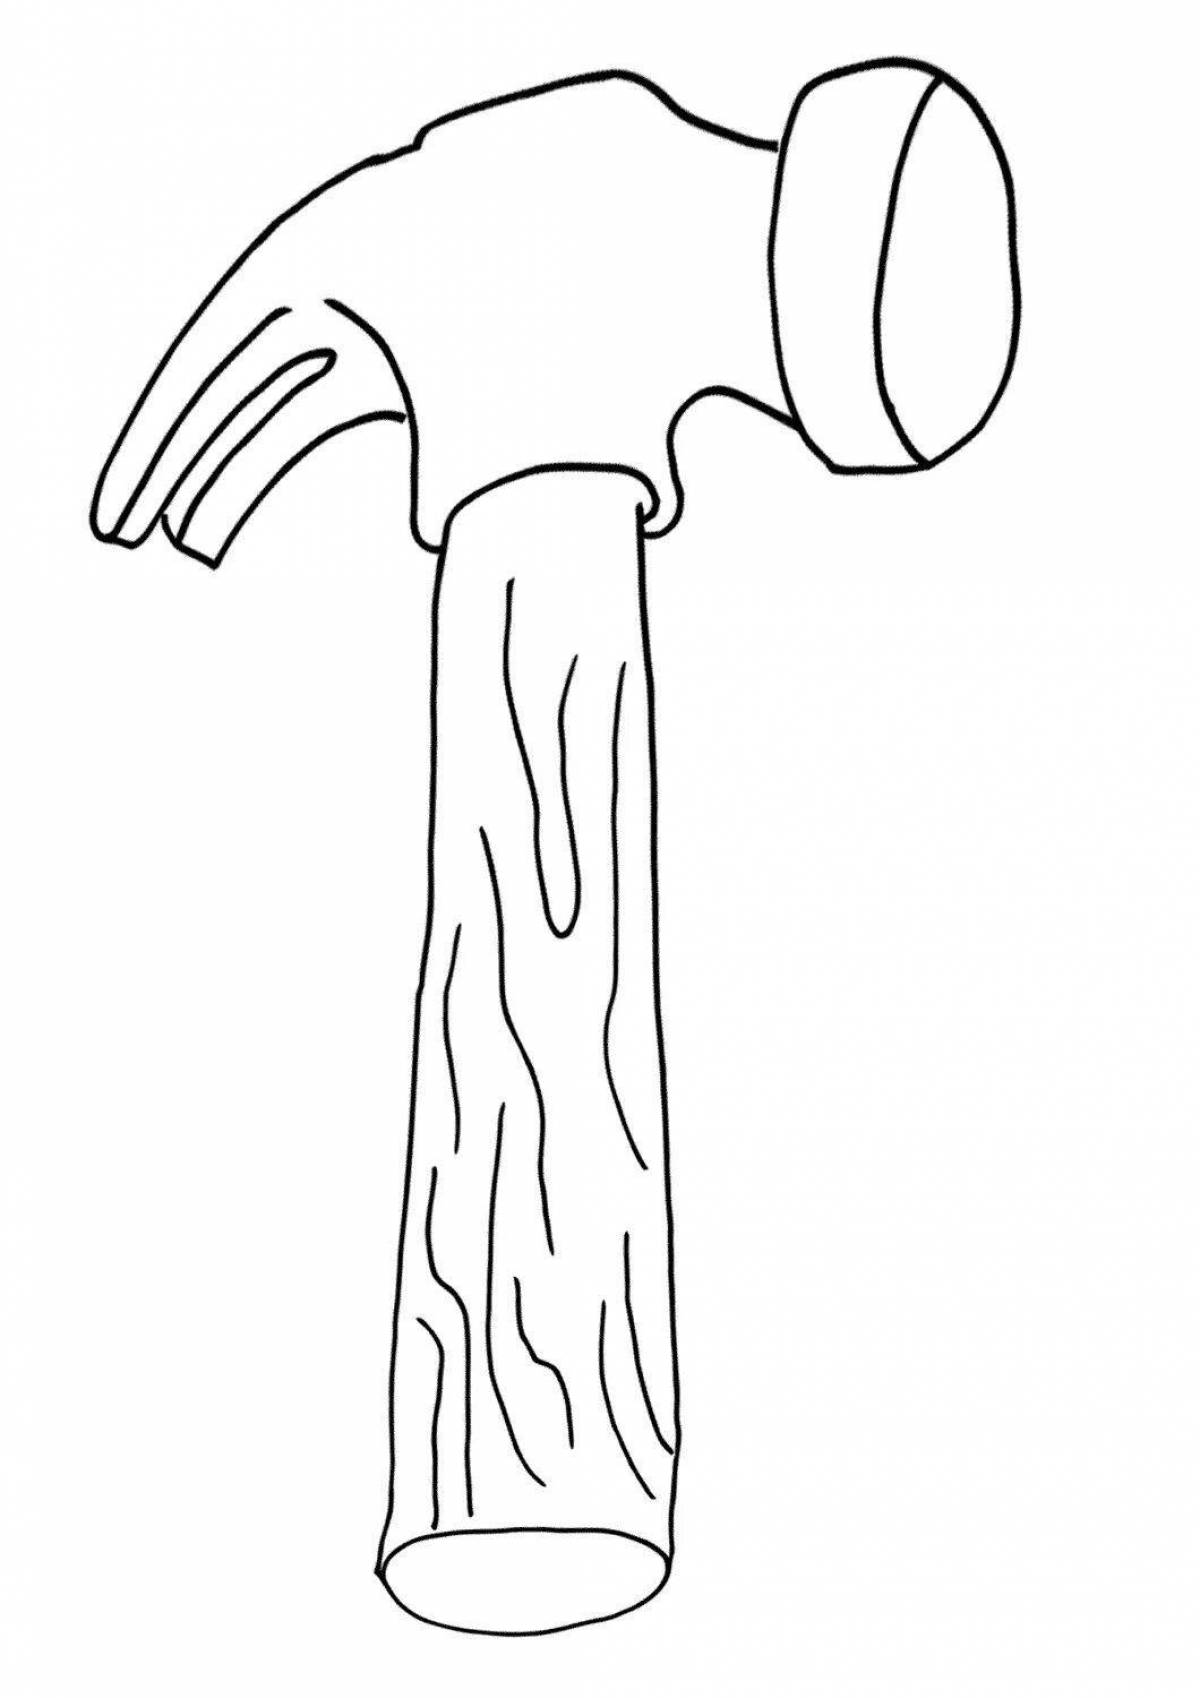 Junior Glowing Hammer Coloring Page